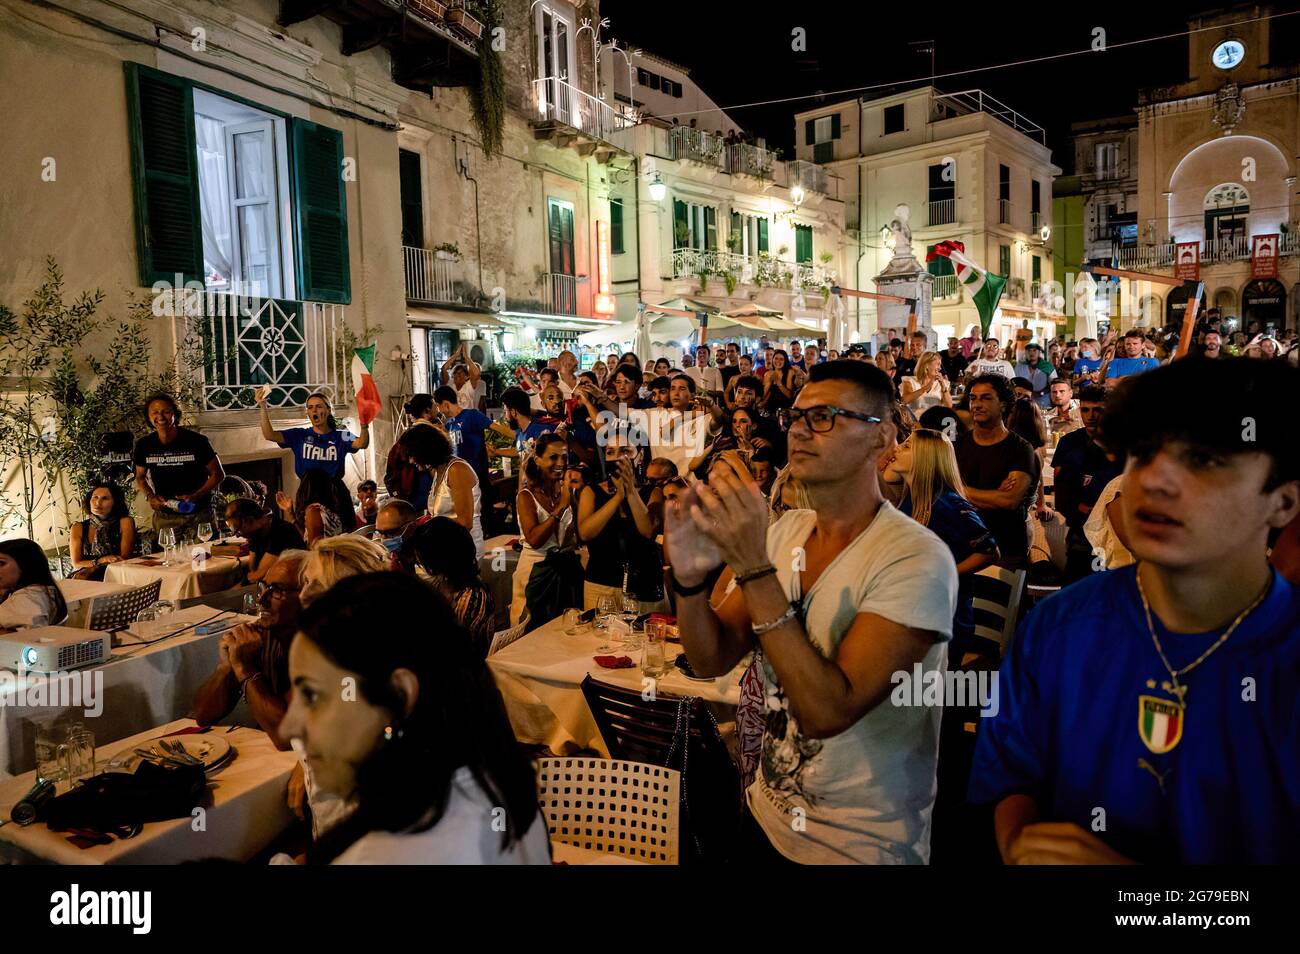 Tropea, Italy. 11th July, 2021. People seen clapping their hands in ...